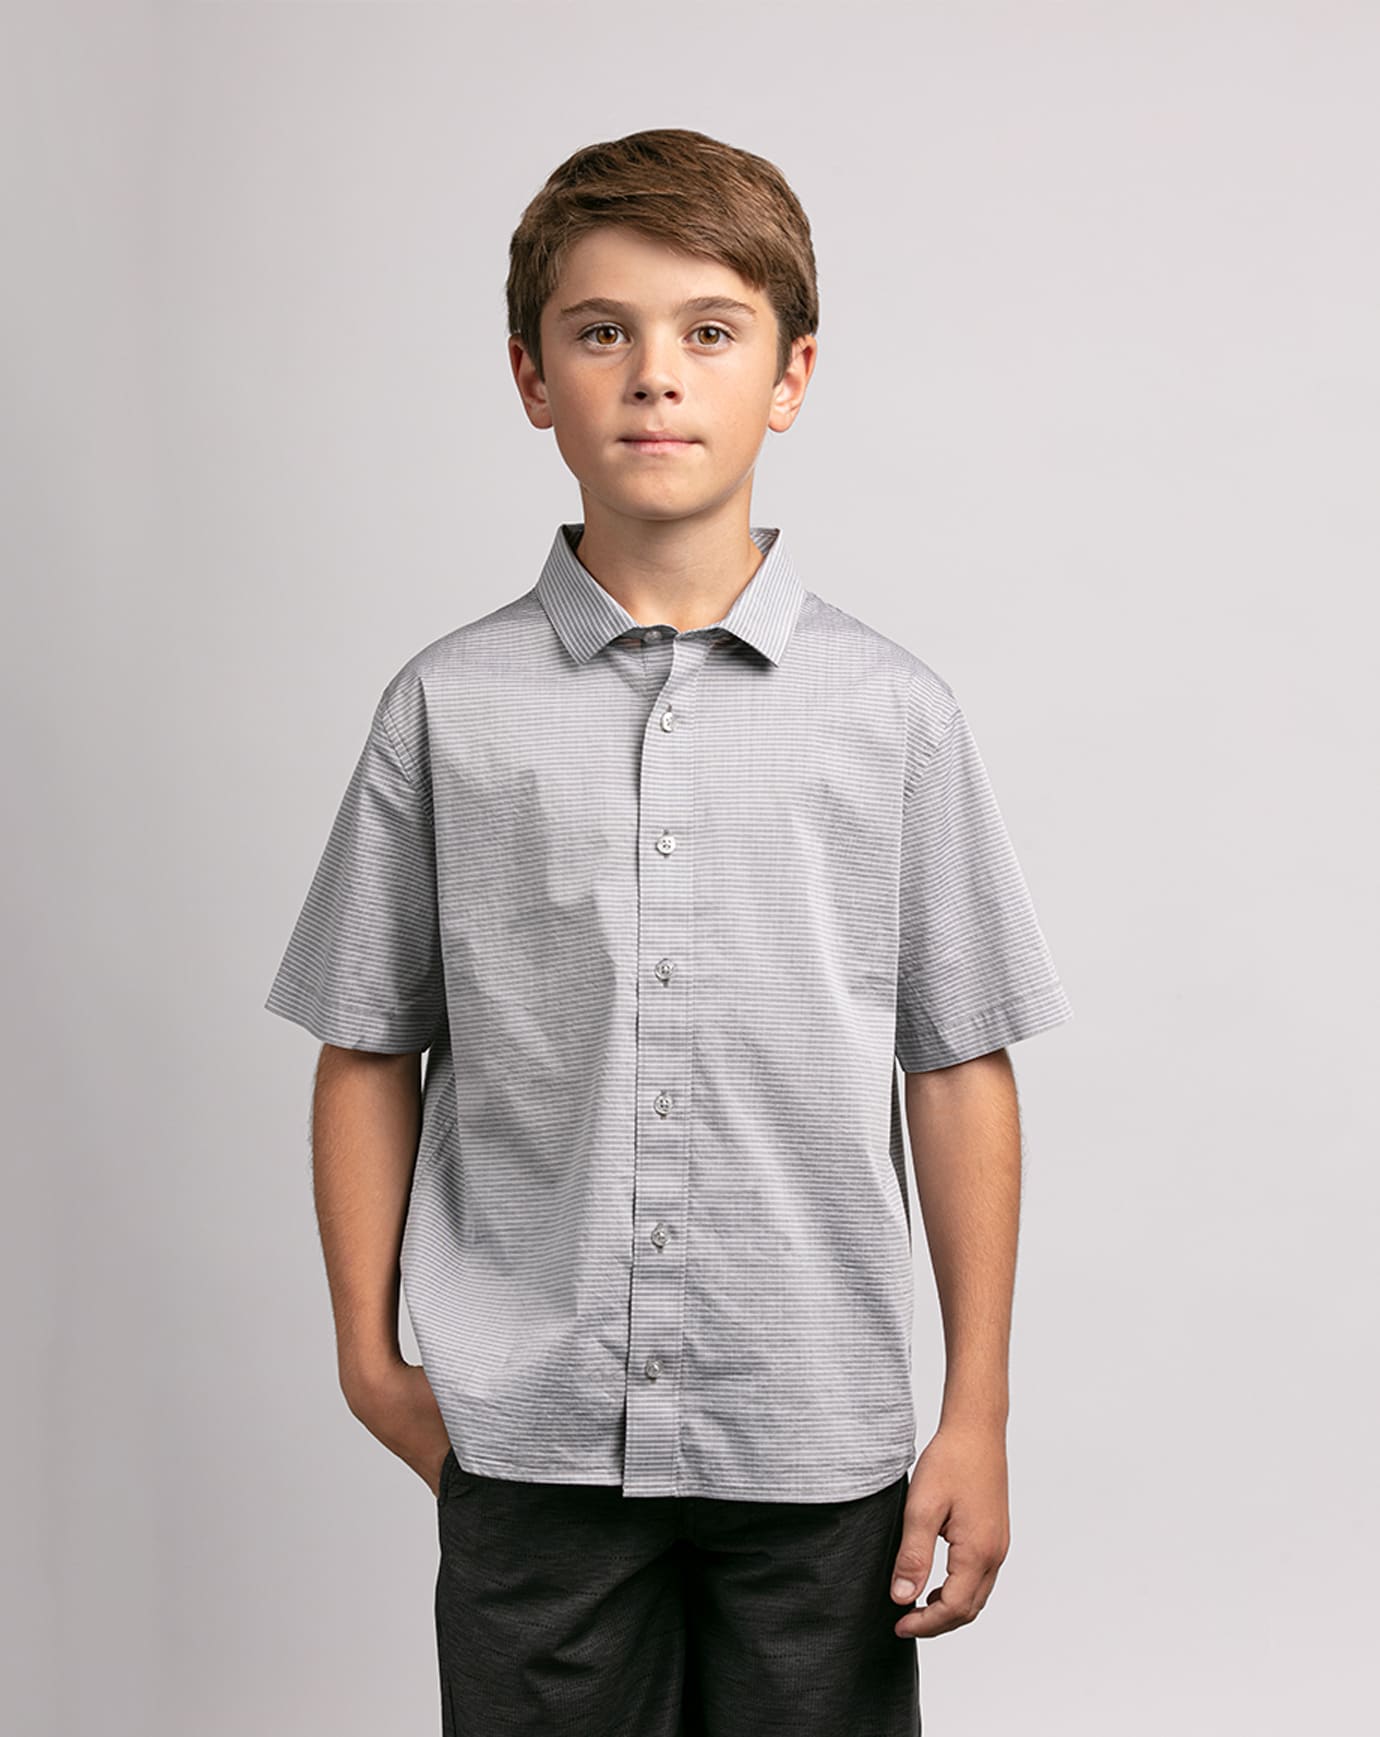 THE TAKE AWAY YOUTH BUTTON-UP Image 1